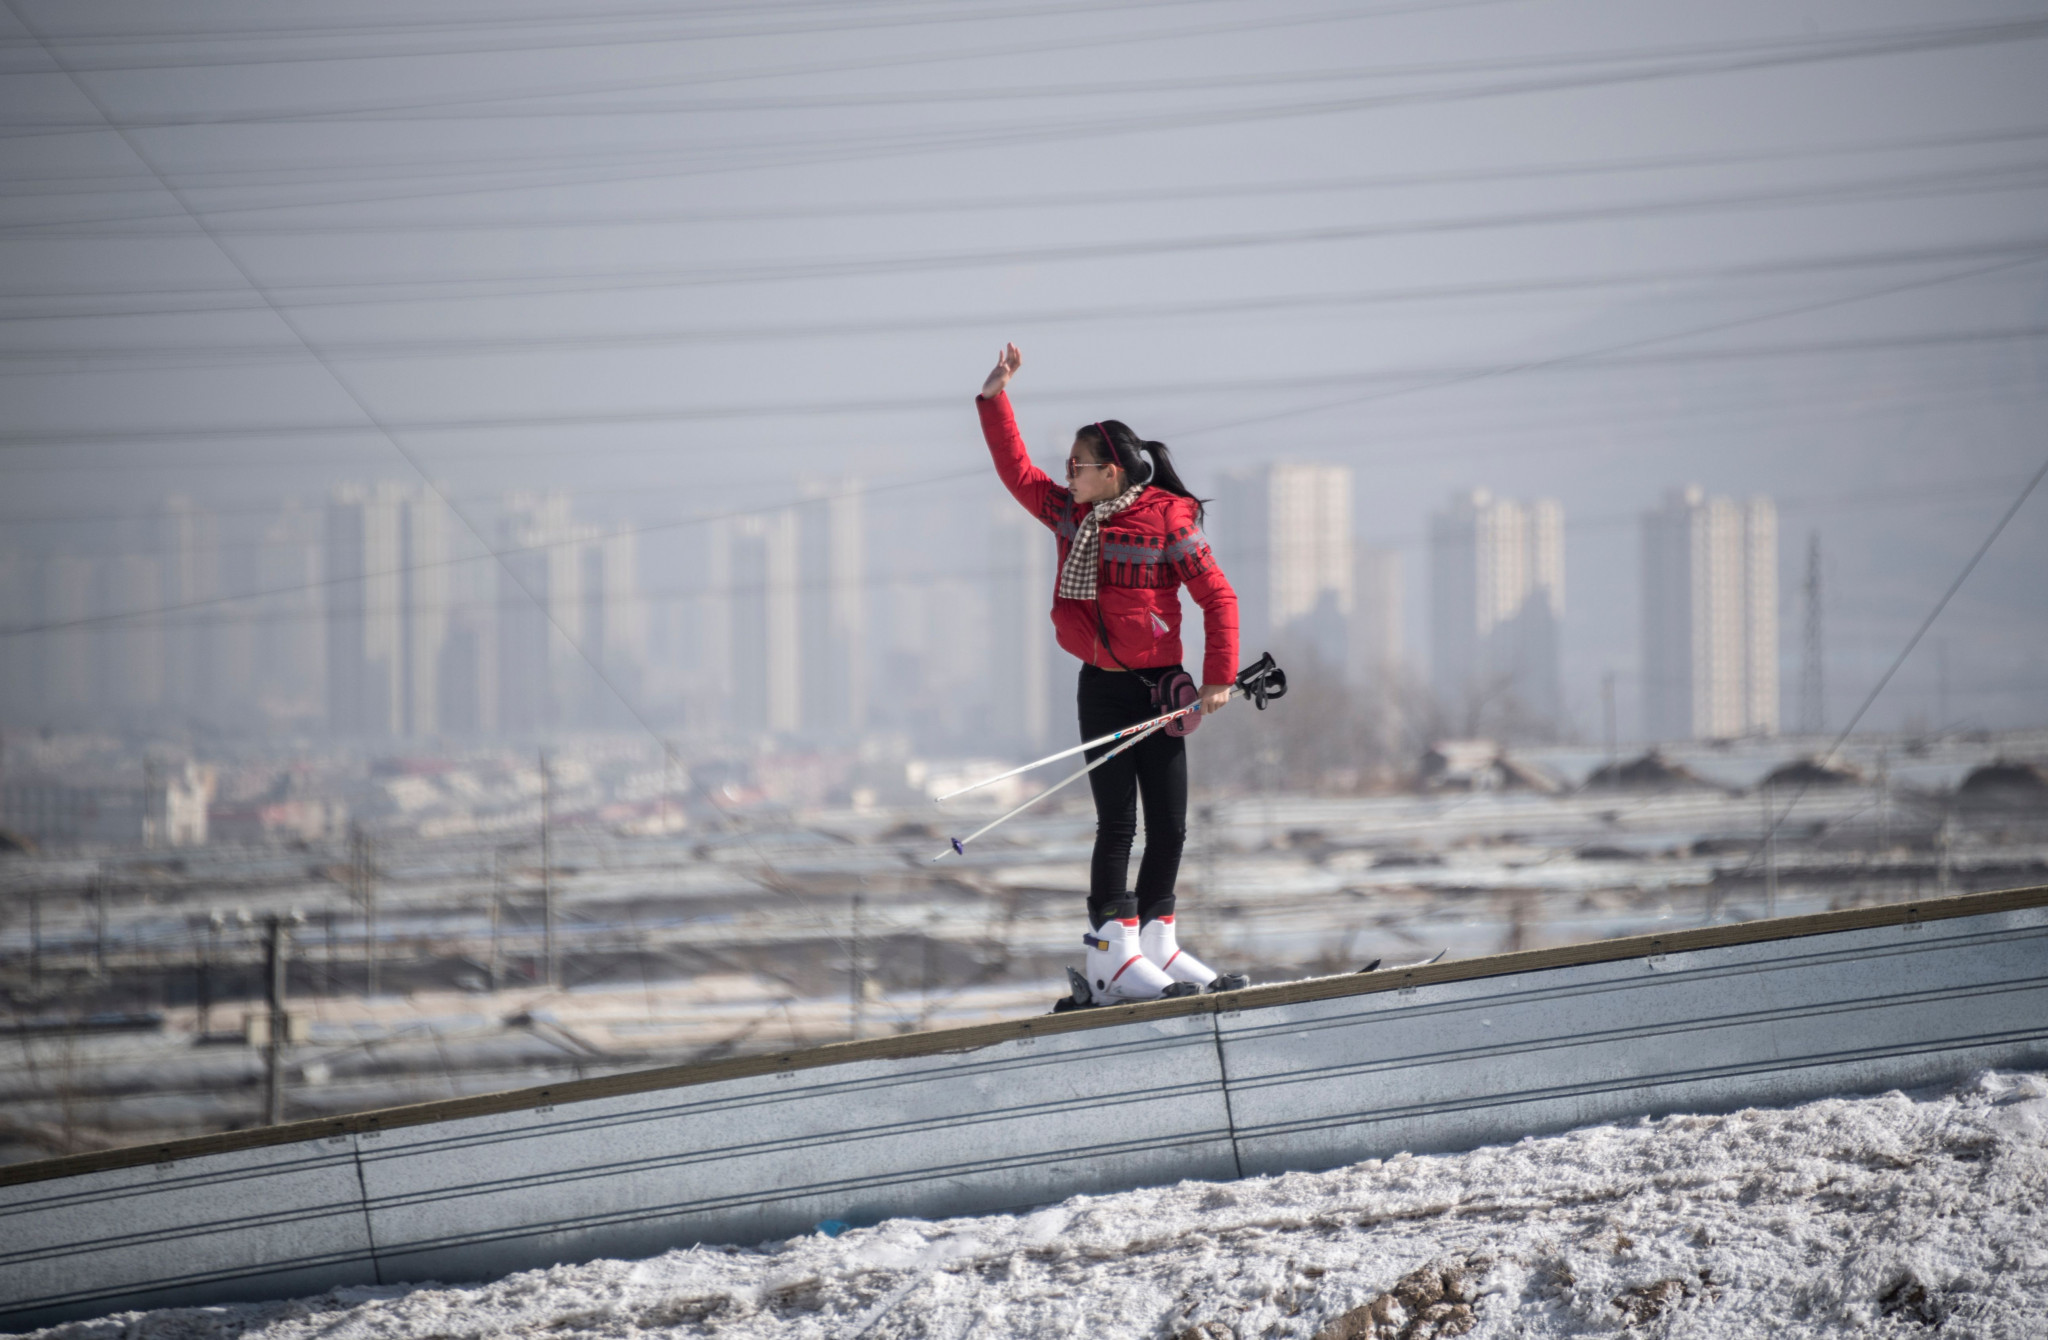 China is preparing for the Winter Olympics in 2022 ©Getty Images